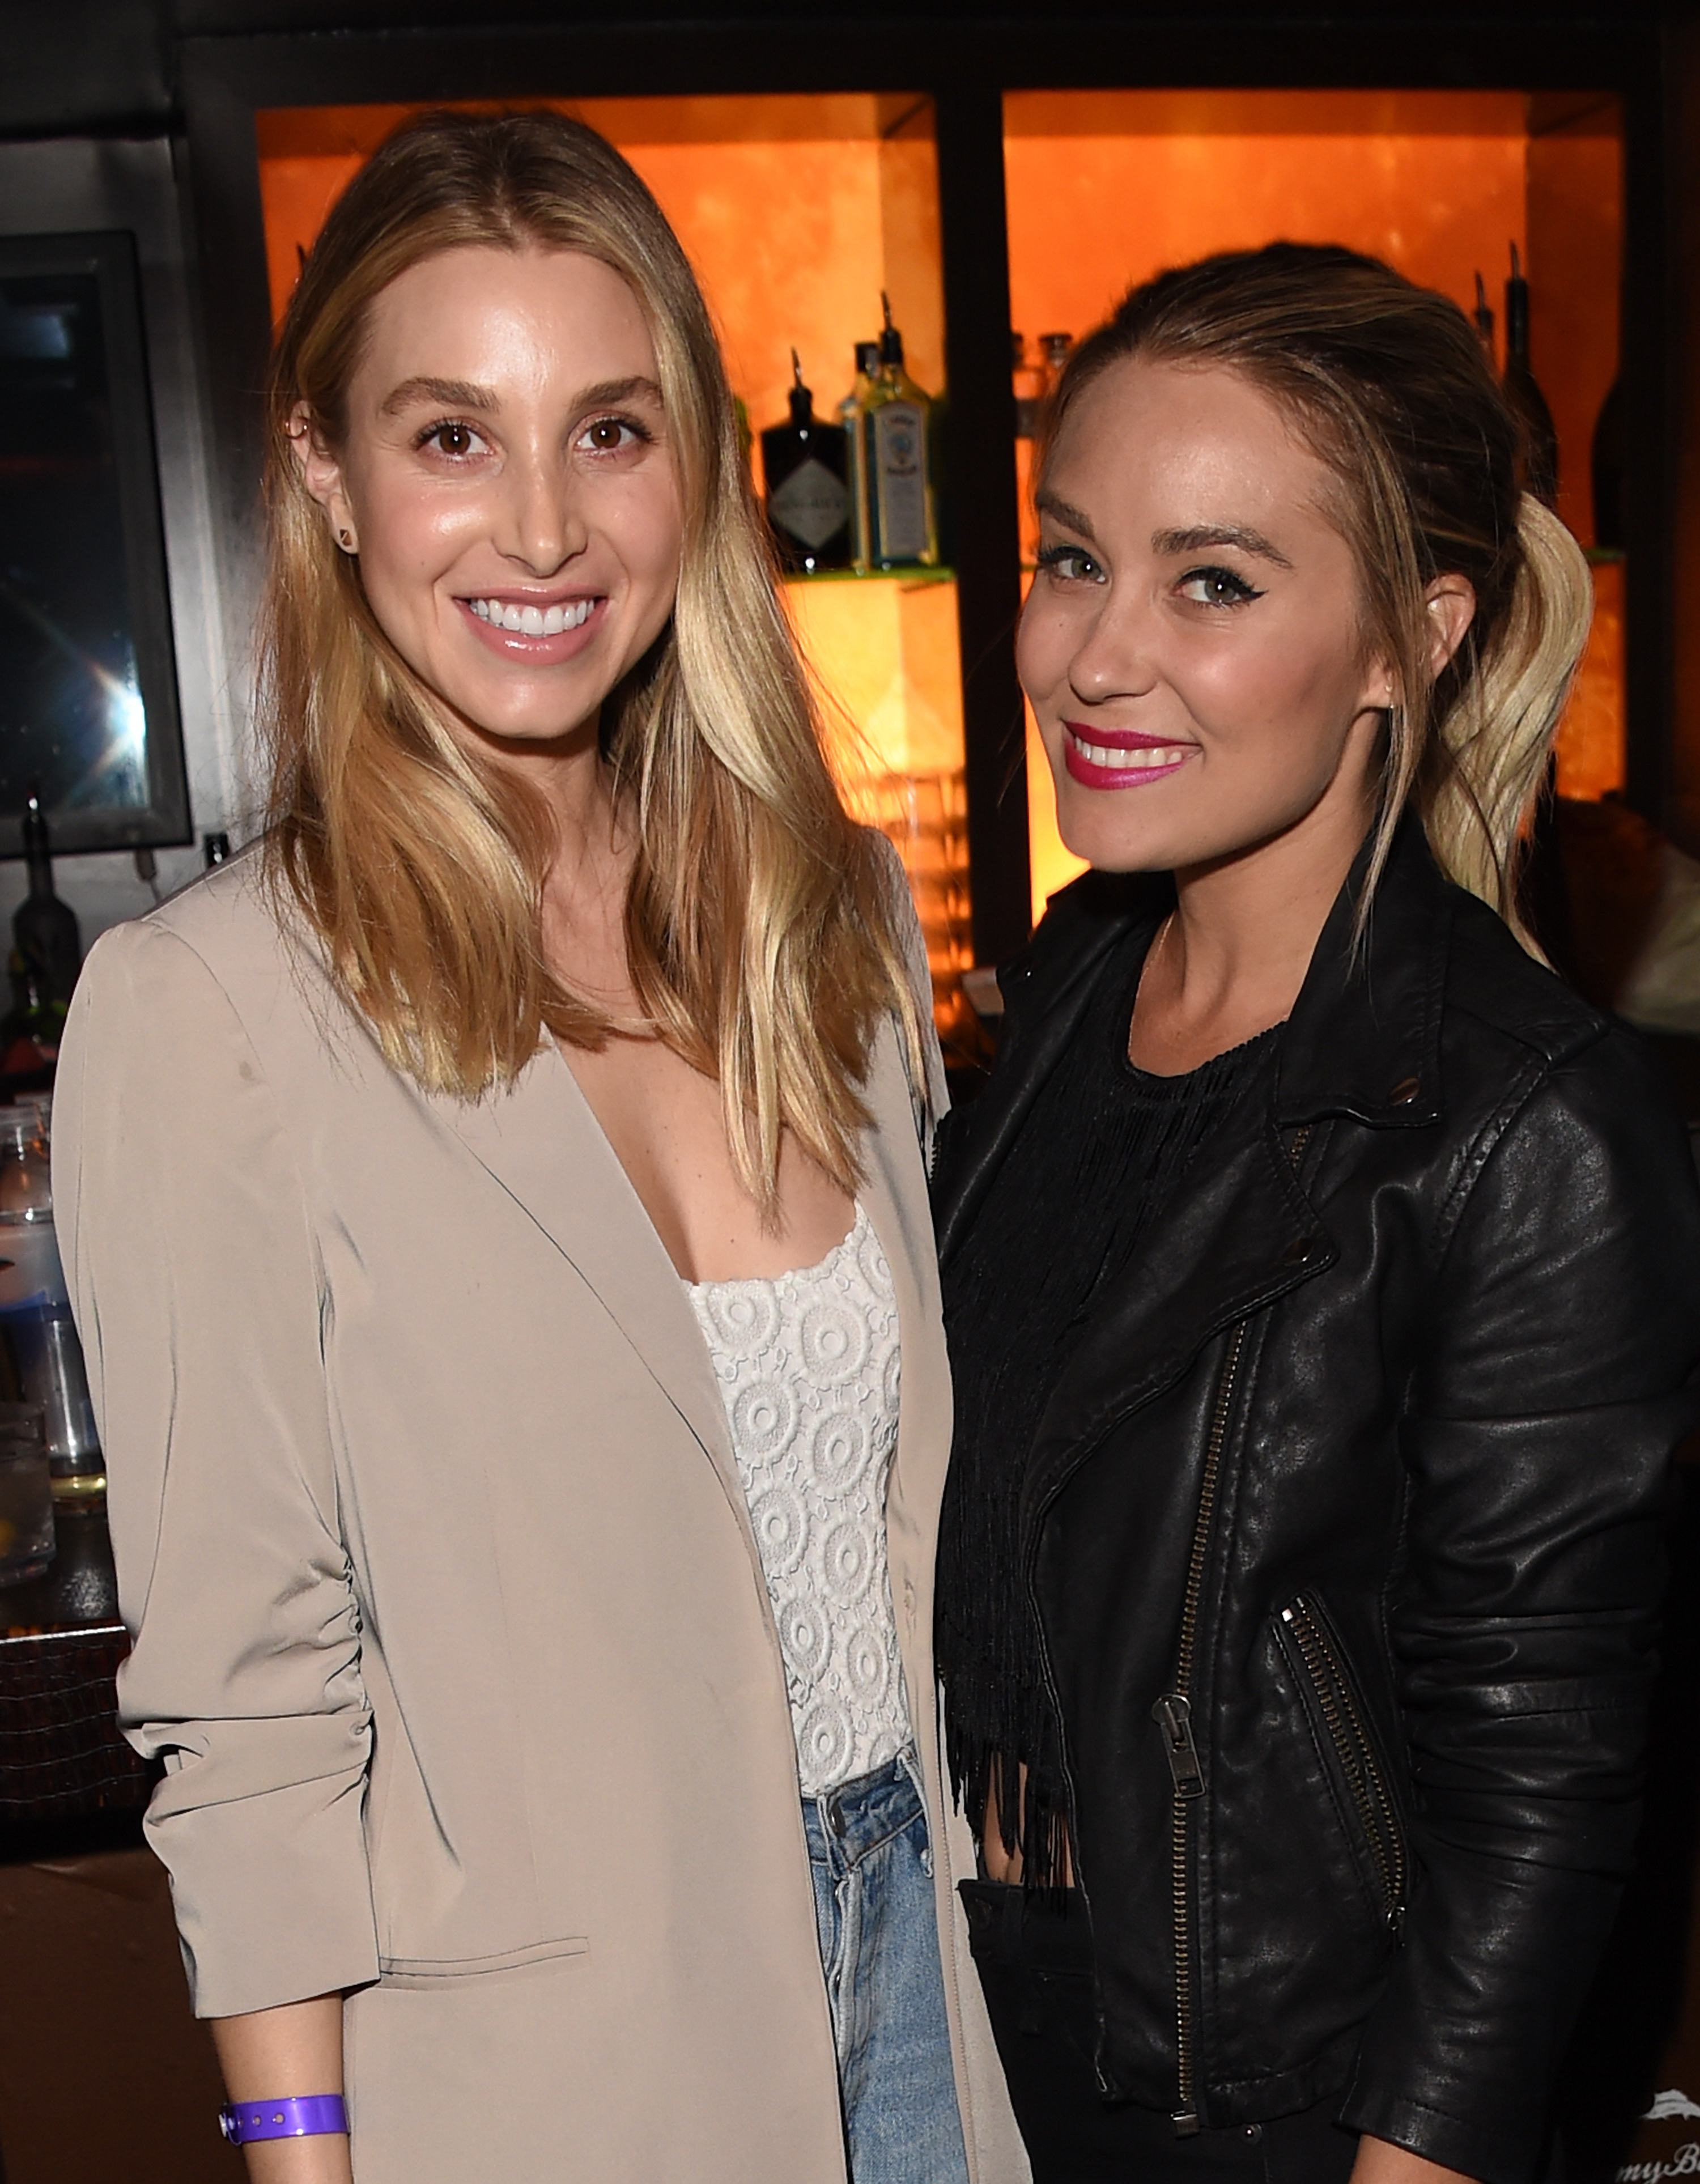 LOS ANGELES, CA - AUGUST 22: (L-R) Whitney Port and Lauren Conrad attend a private event at Hyde Staples Center hosted by Tommy Bahama during the Taylor Swift concert on August 22, 2015 in Los Angeles, California. (Photo by Jason Merritt/Getty Images for Tommy Bahama)